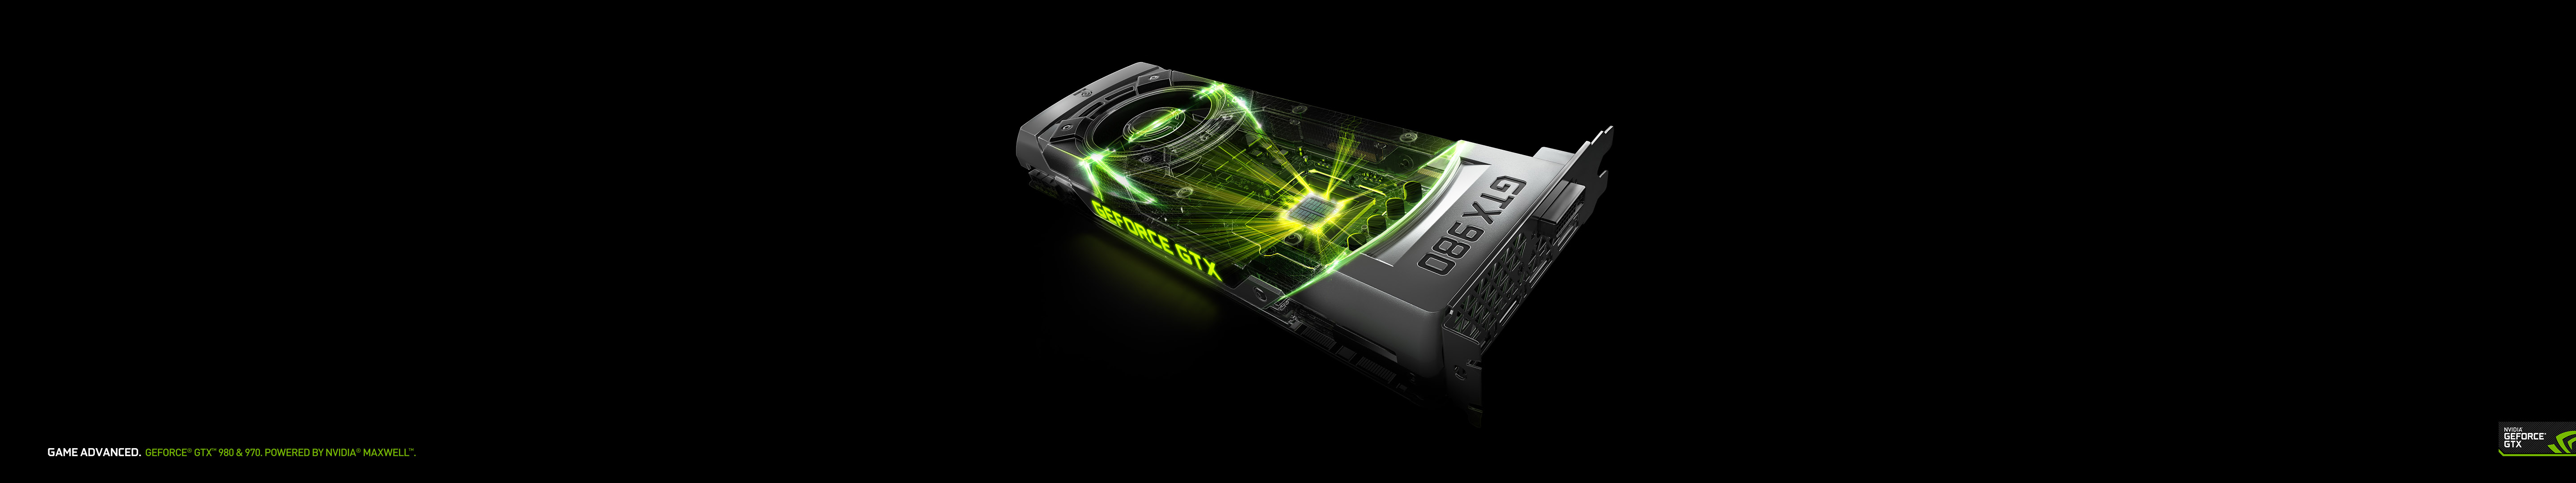 Free Download Hardocp New Geforce Gtx 980 970 Wallpapers 5760x1080 For Your Desktop Mobile Tablet Explore 45 5760 X 2160 Wallpaper Nvidia Wallpaper 19x1080 Hd 5760 X 1080 Triple Monitor Wallpaper Nvidia Triple Monitor Wallpaper